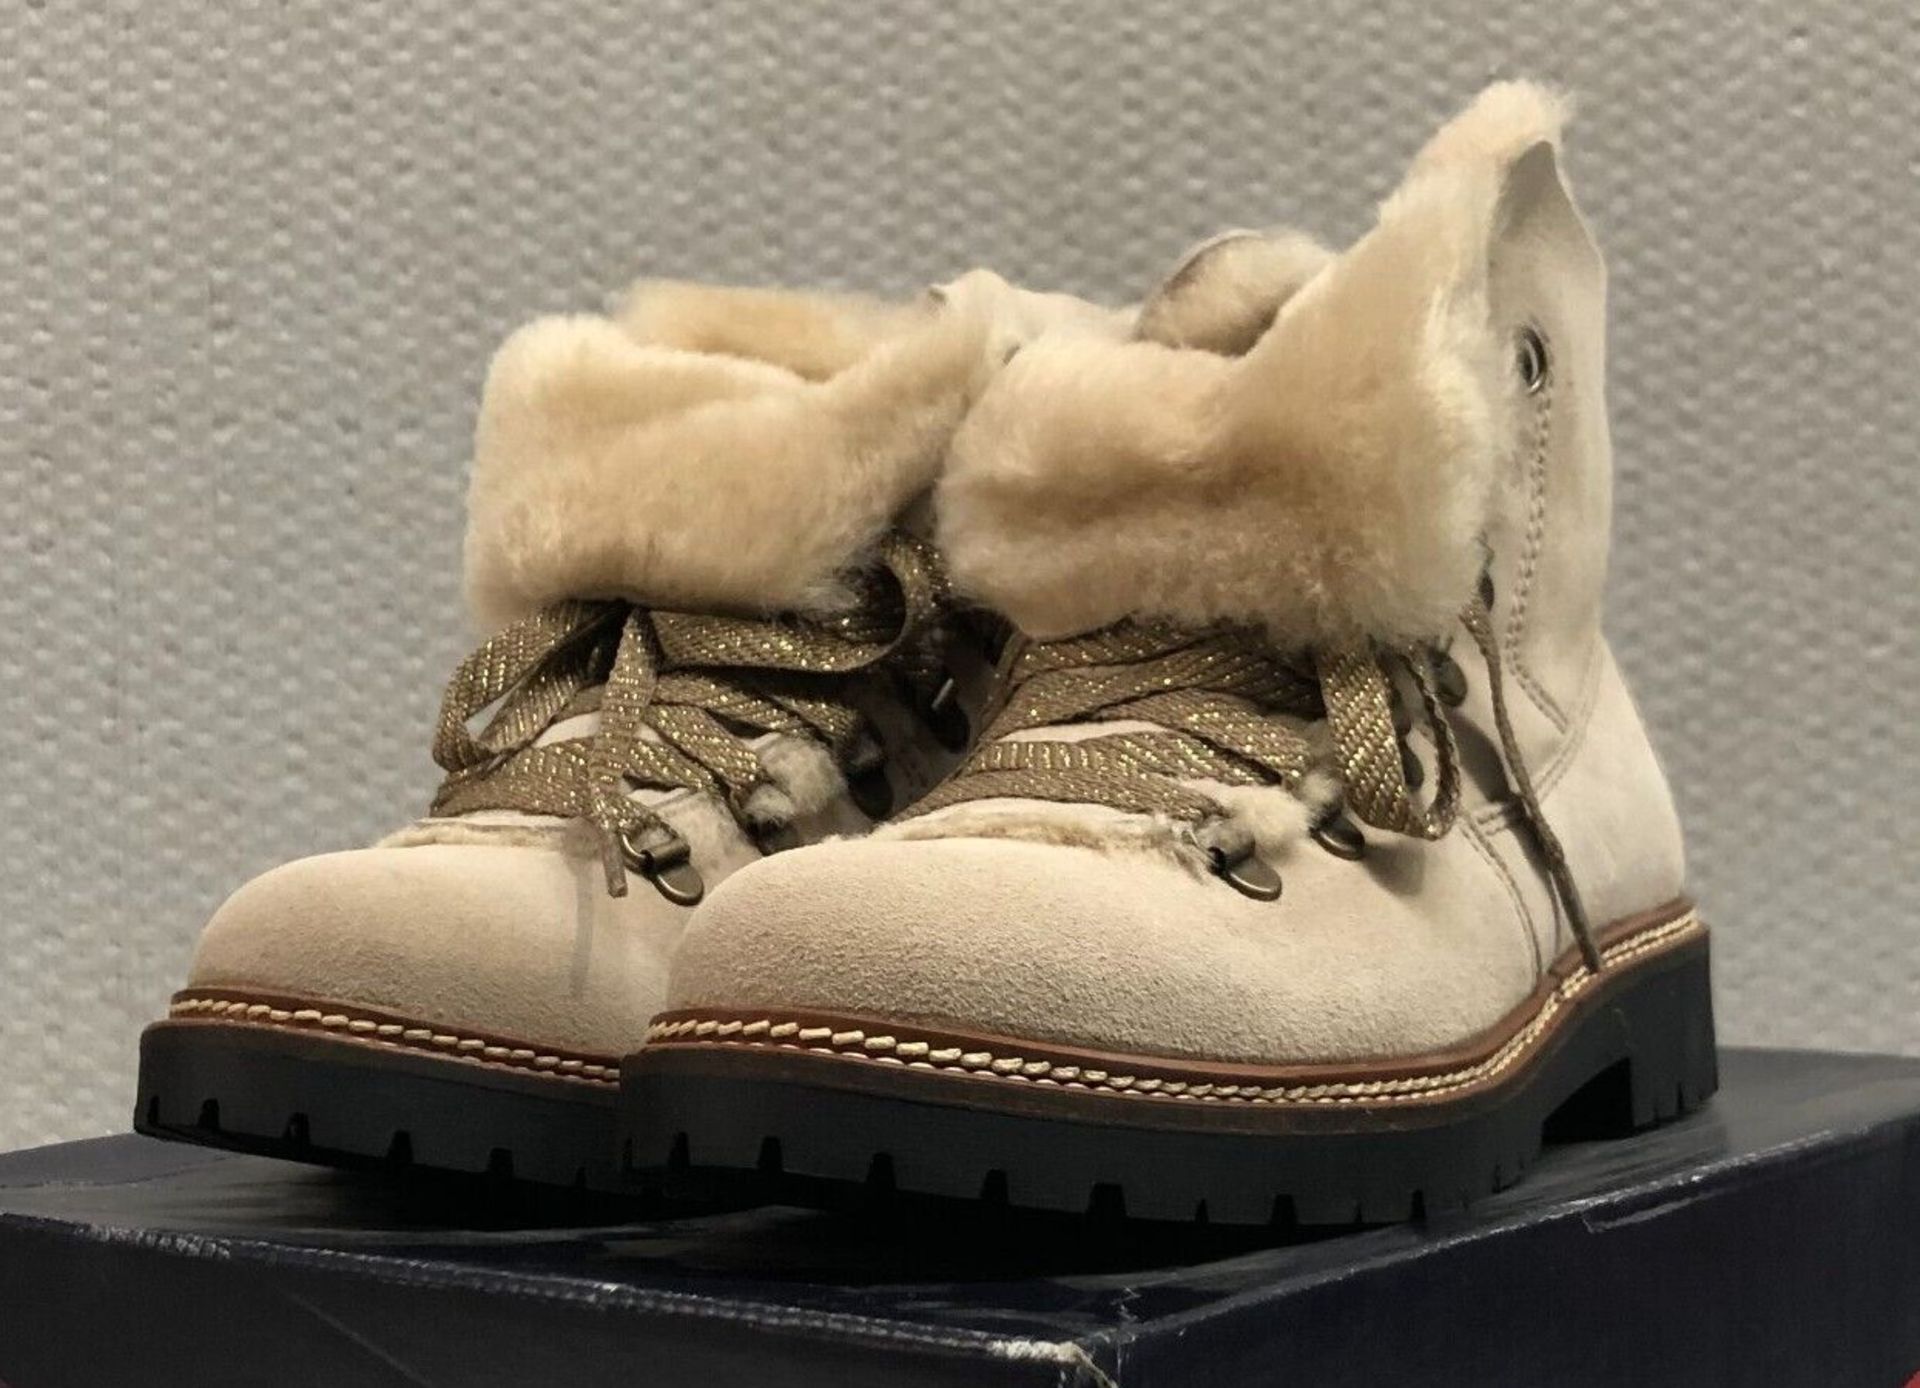 1 x Pair of Designer Olang Women's Winter Boots - Aurora.Lux 88 Beige - Euro Size 39 - New Boxed - Image 2 of 6